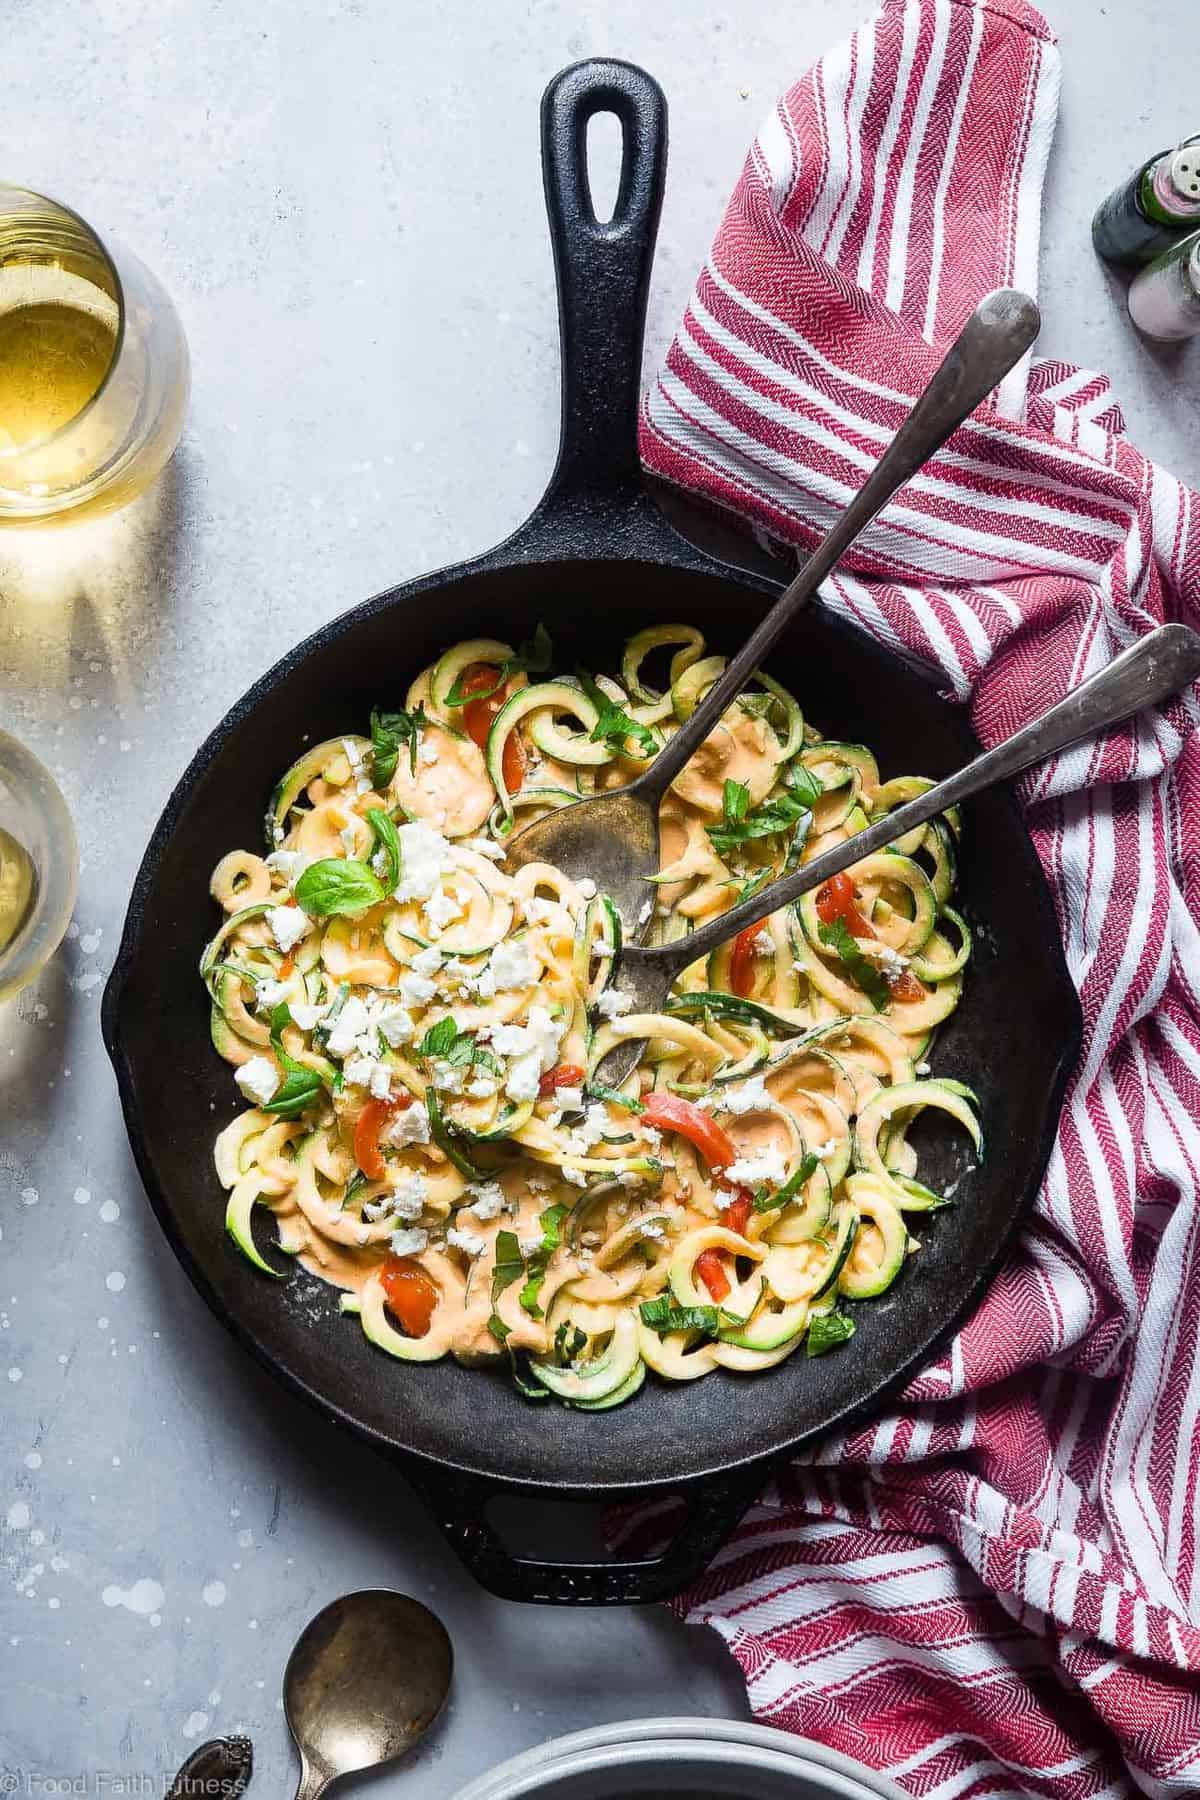 Zucchini Noodles with Greek Yogurt Roasted Red Pepper Pasta Sauce - zucchini noodles are covered with a creamy, low carb roasted red pepper sauce for an easy, protein packed, meatless dinner, that is under 300 calories and that the whole family will love! | #Foodfaithfitness | #Lowcarb #Glutenfree #Keto #Greekyogurt #ZucchiniNoodles